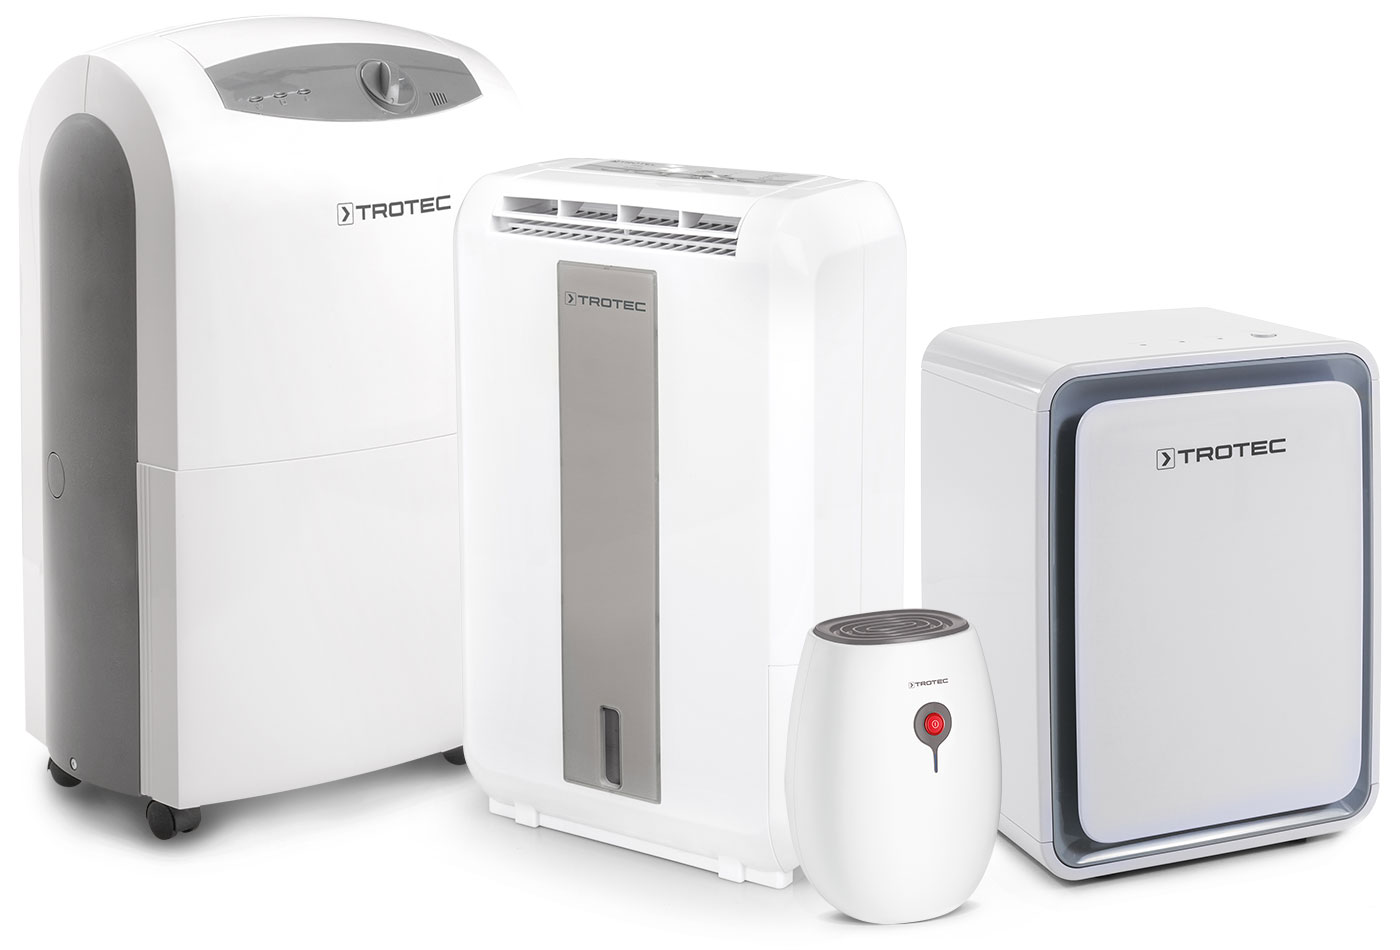 Trotec offers the world’s largest range of dehumidifiers